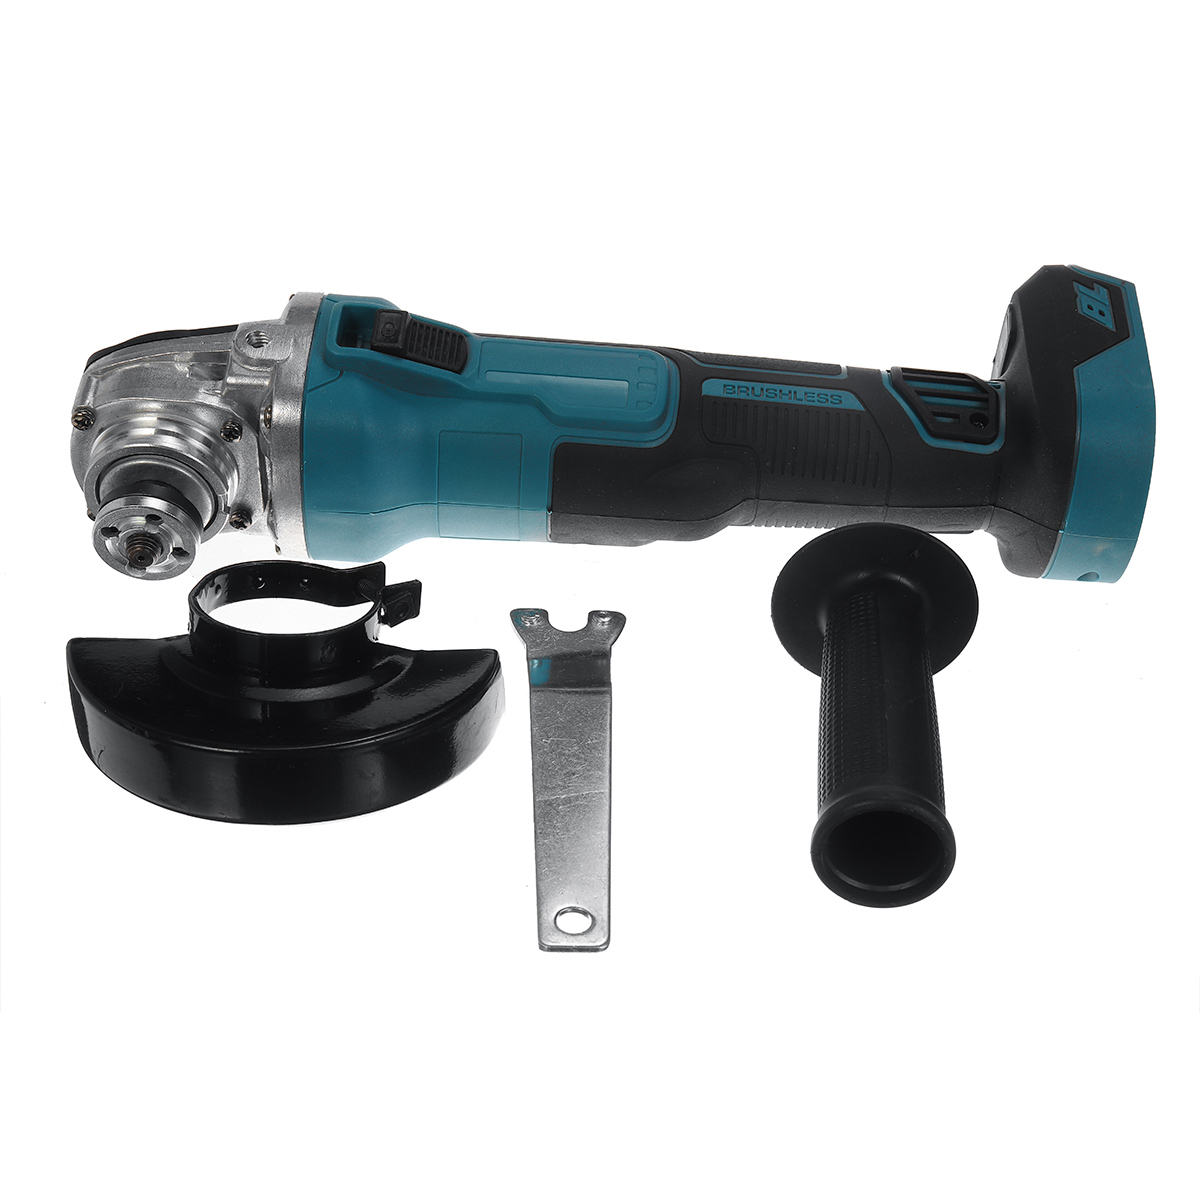 Drillpro-Electric-Brushless-Cordless-Angle-Grinder-M10-125mm-Cut-for-Makiita-18V-Battery-1791879-7